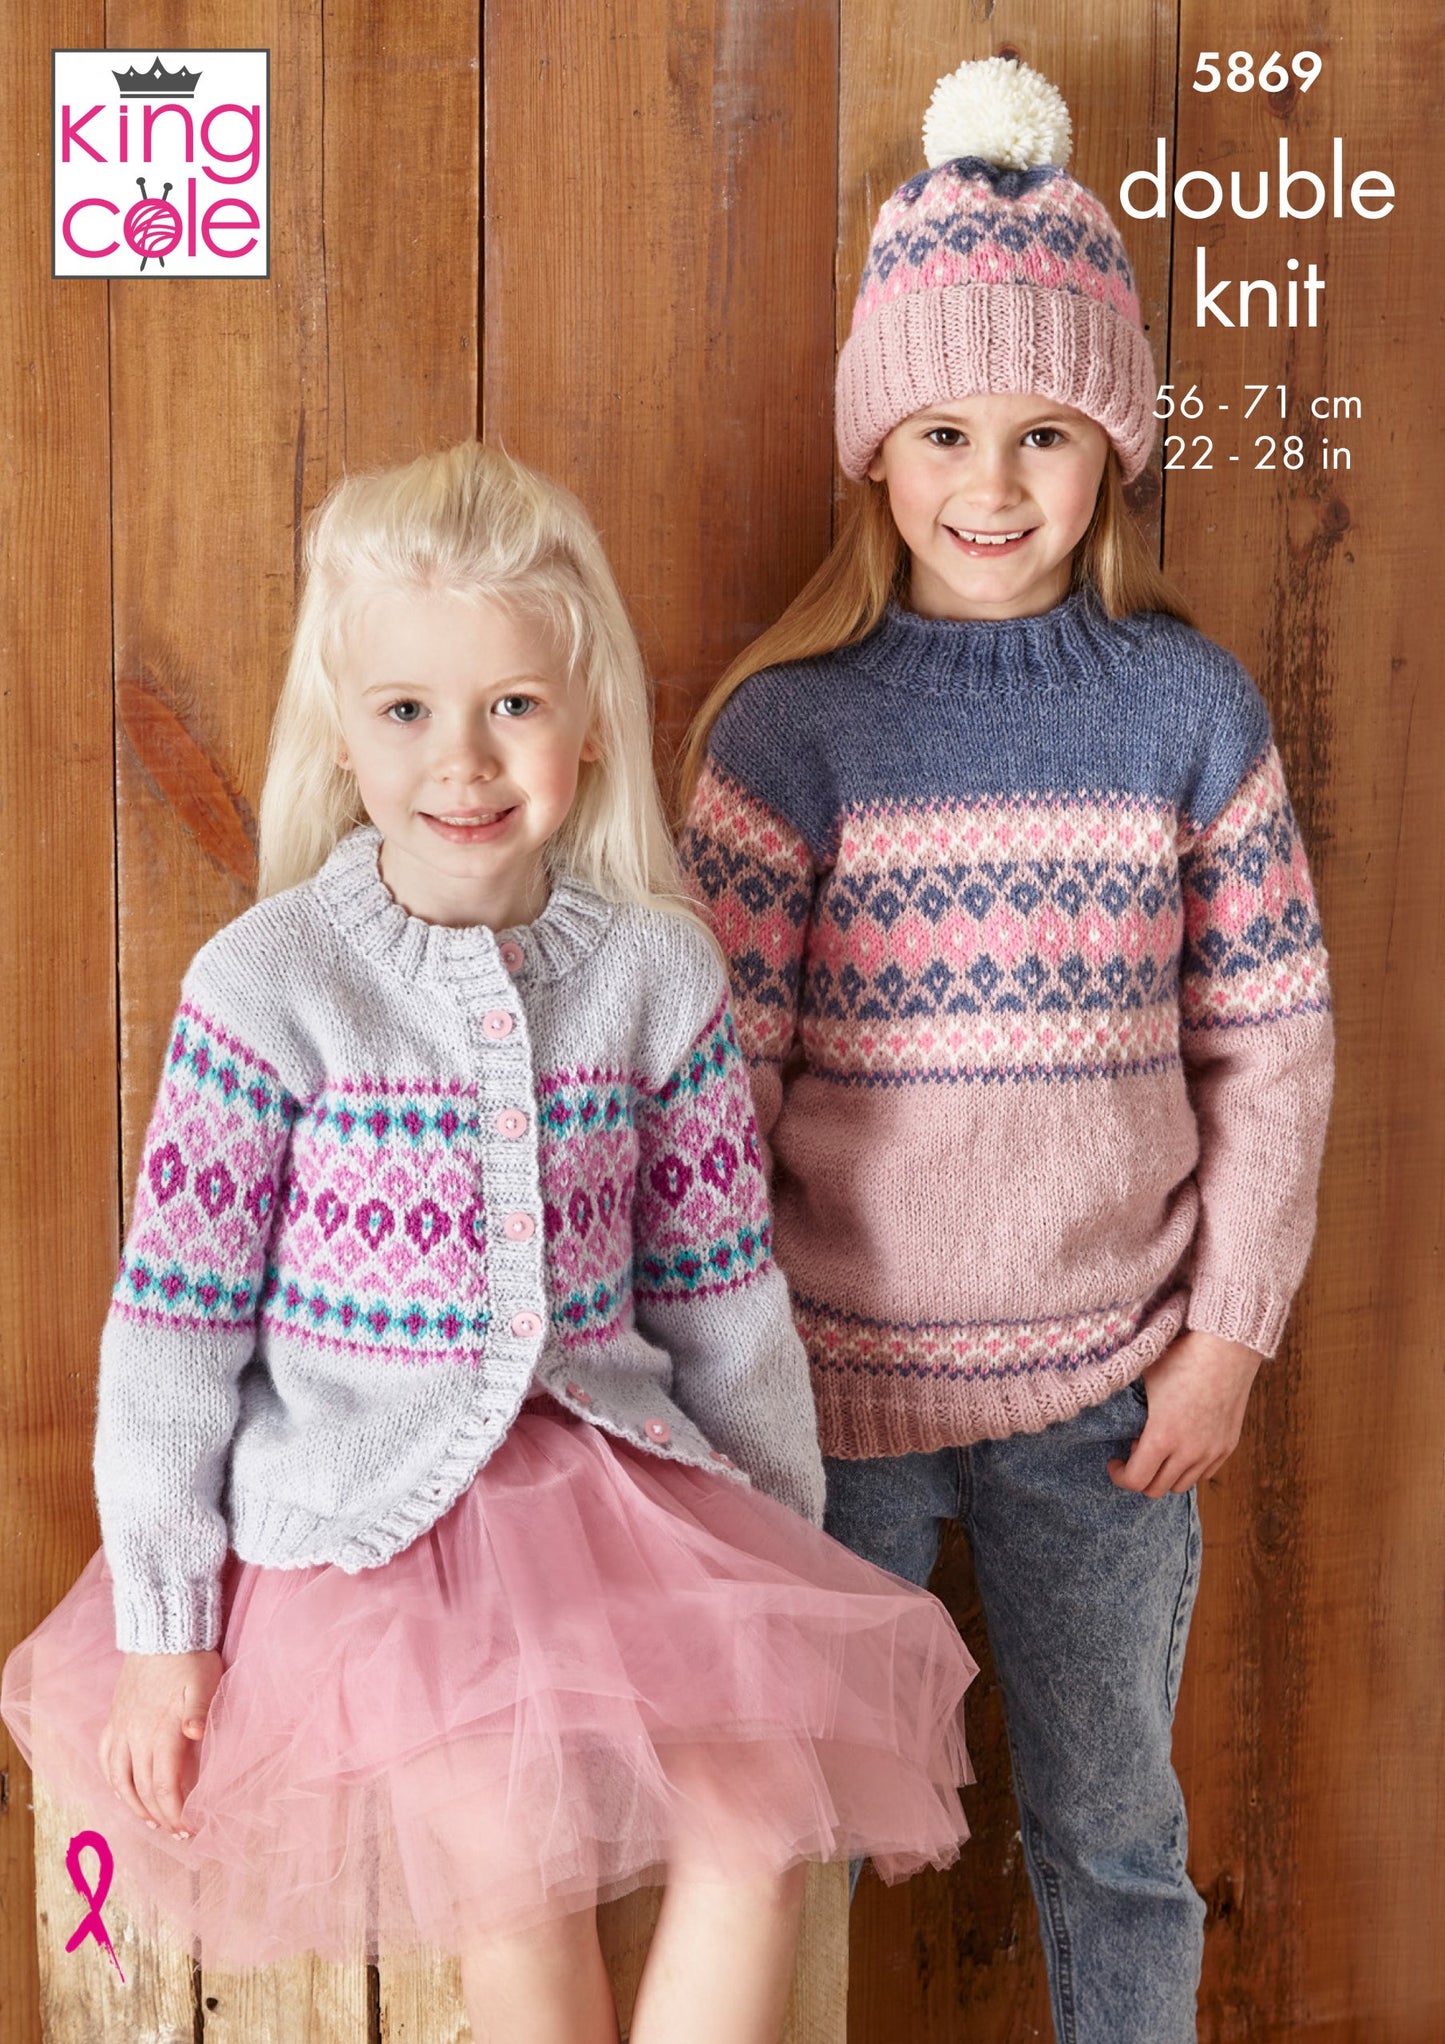 Knitting Pattern 5869 - Sweaters, Cardigan & Hat Knitted in Big Value DK